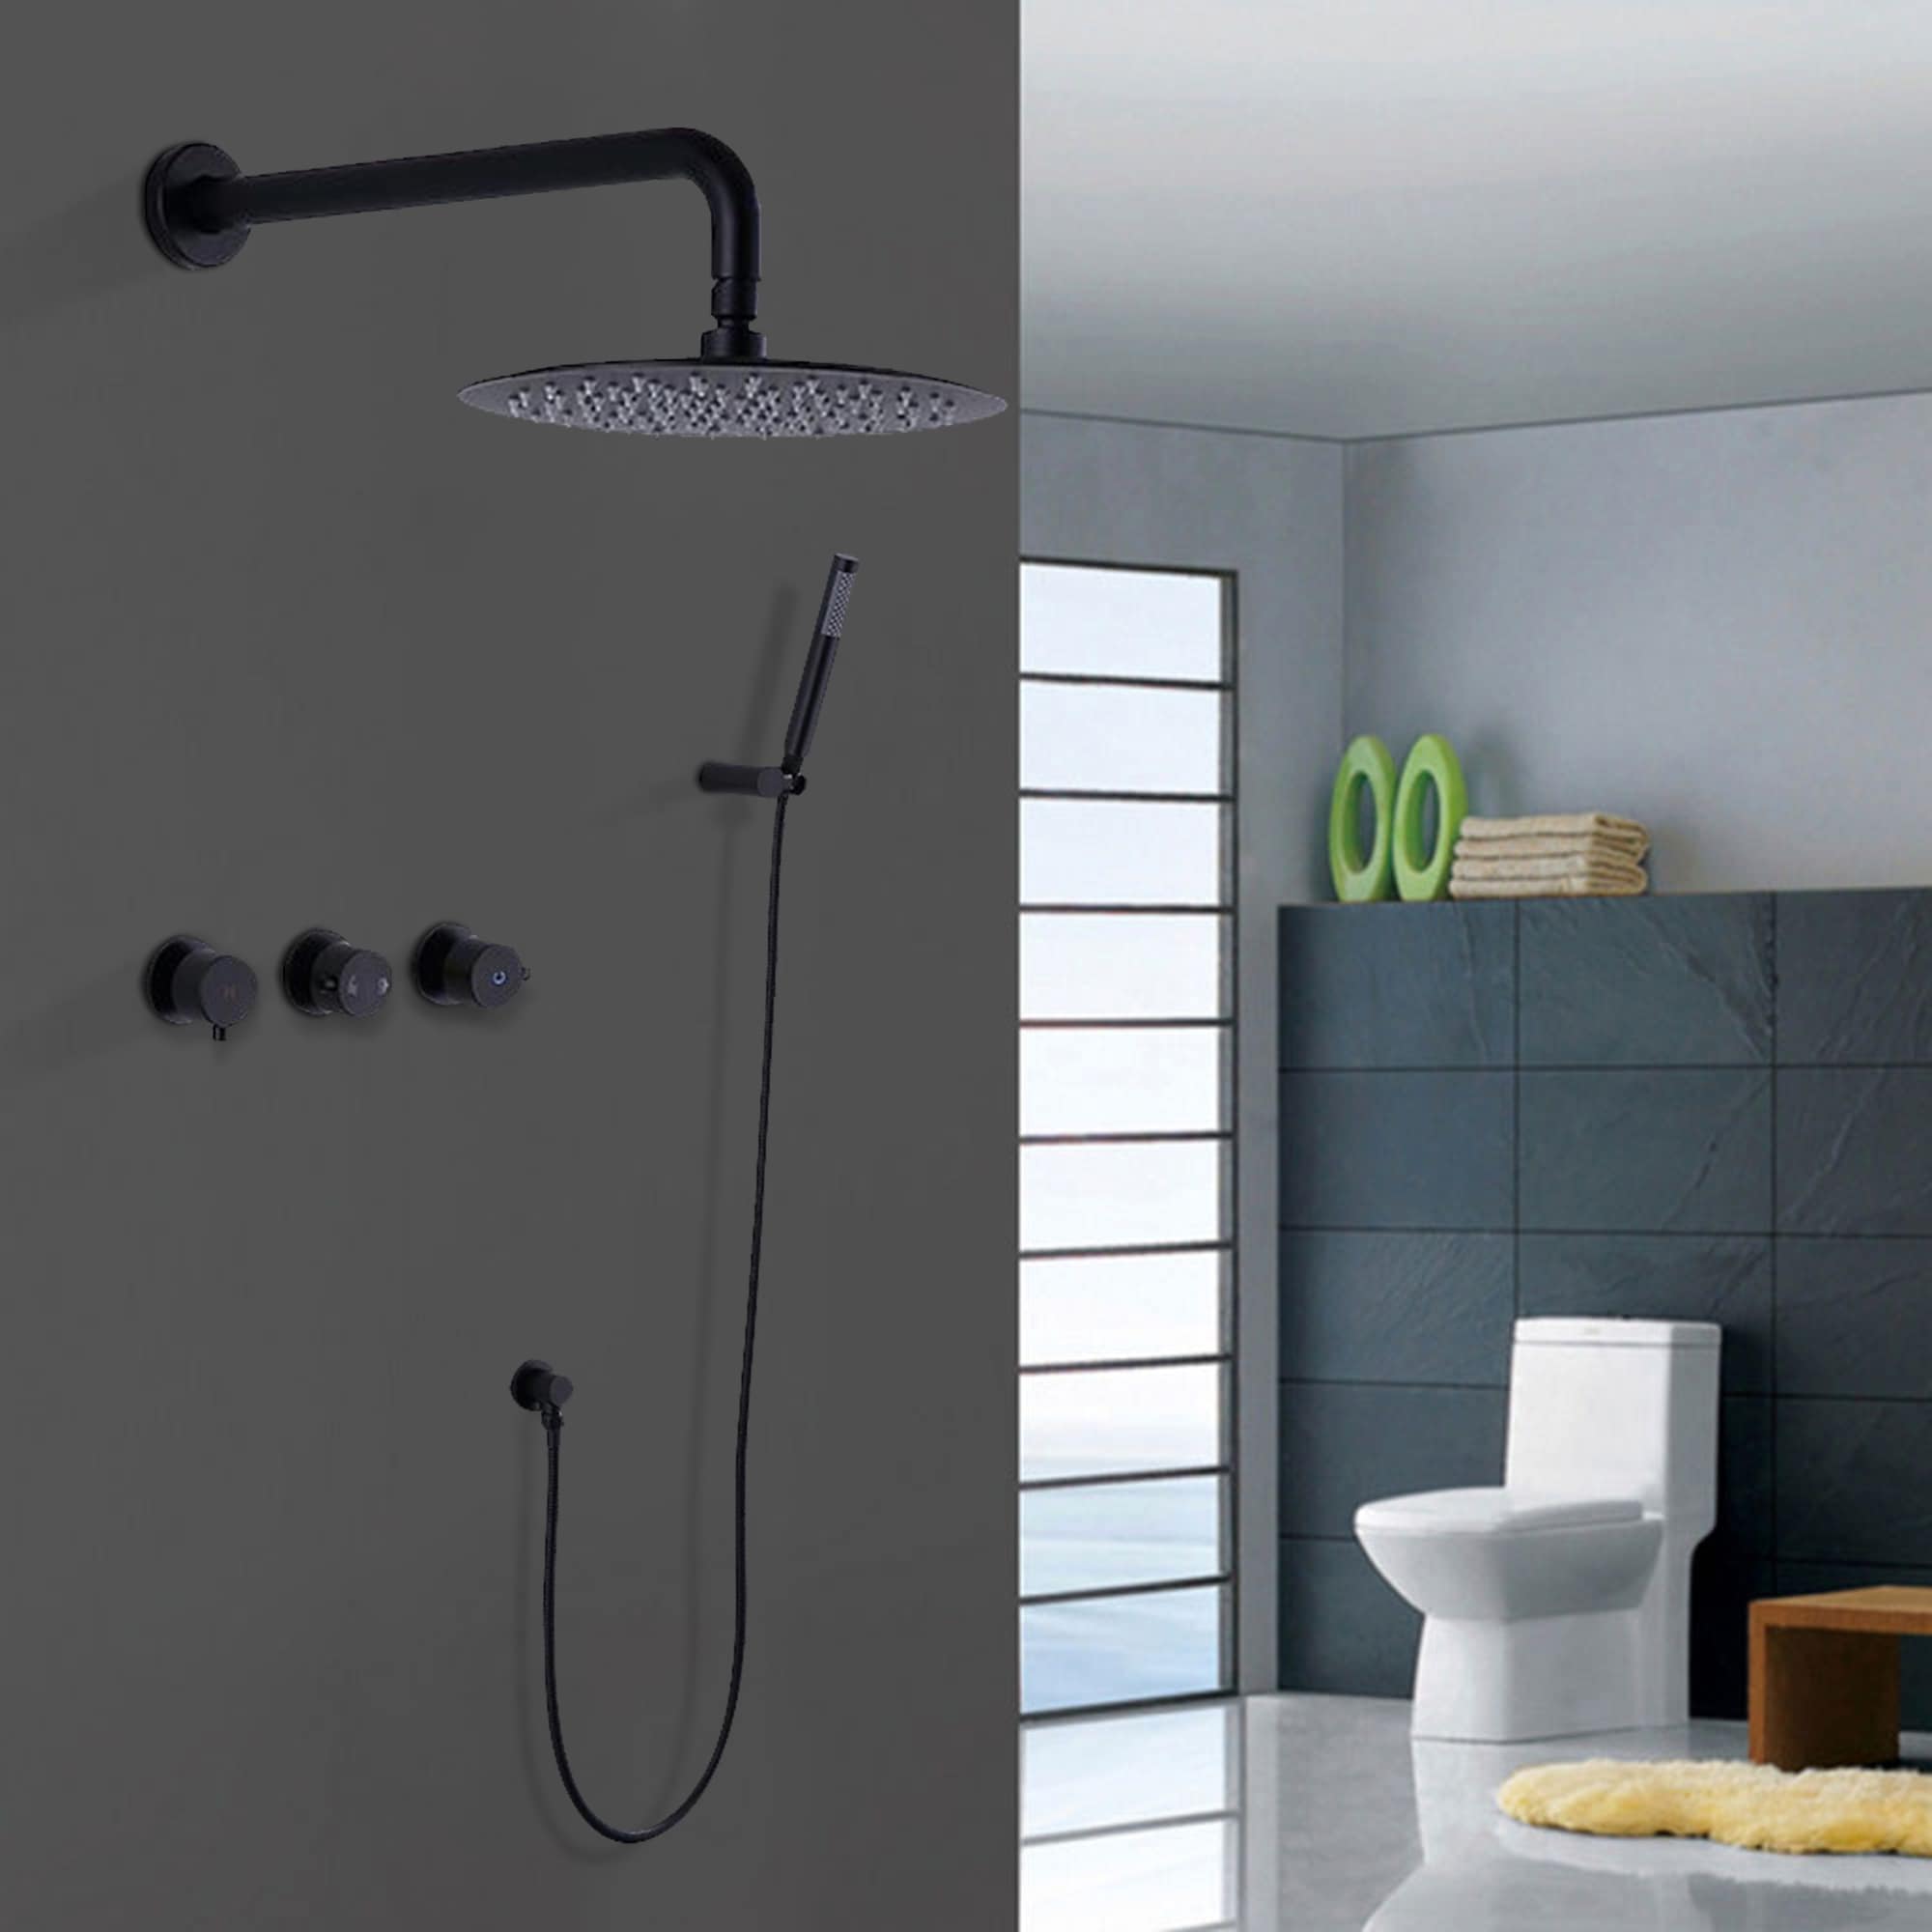 https://ak1.ostkcdn.com/images/products/is/images/direct/7623f12f8cdfe31883586671f01495dca6f2675d/Complete-Shower-System-with-Rough-in-Valve.jpg